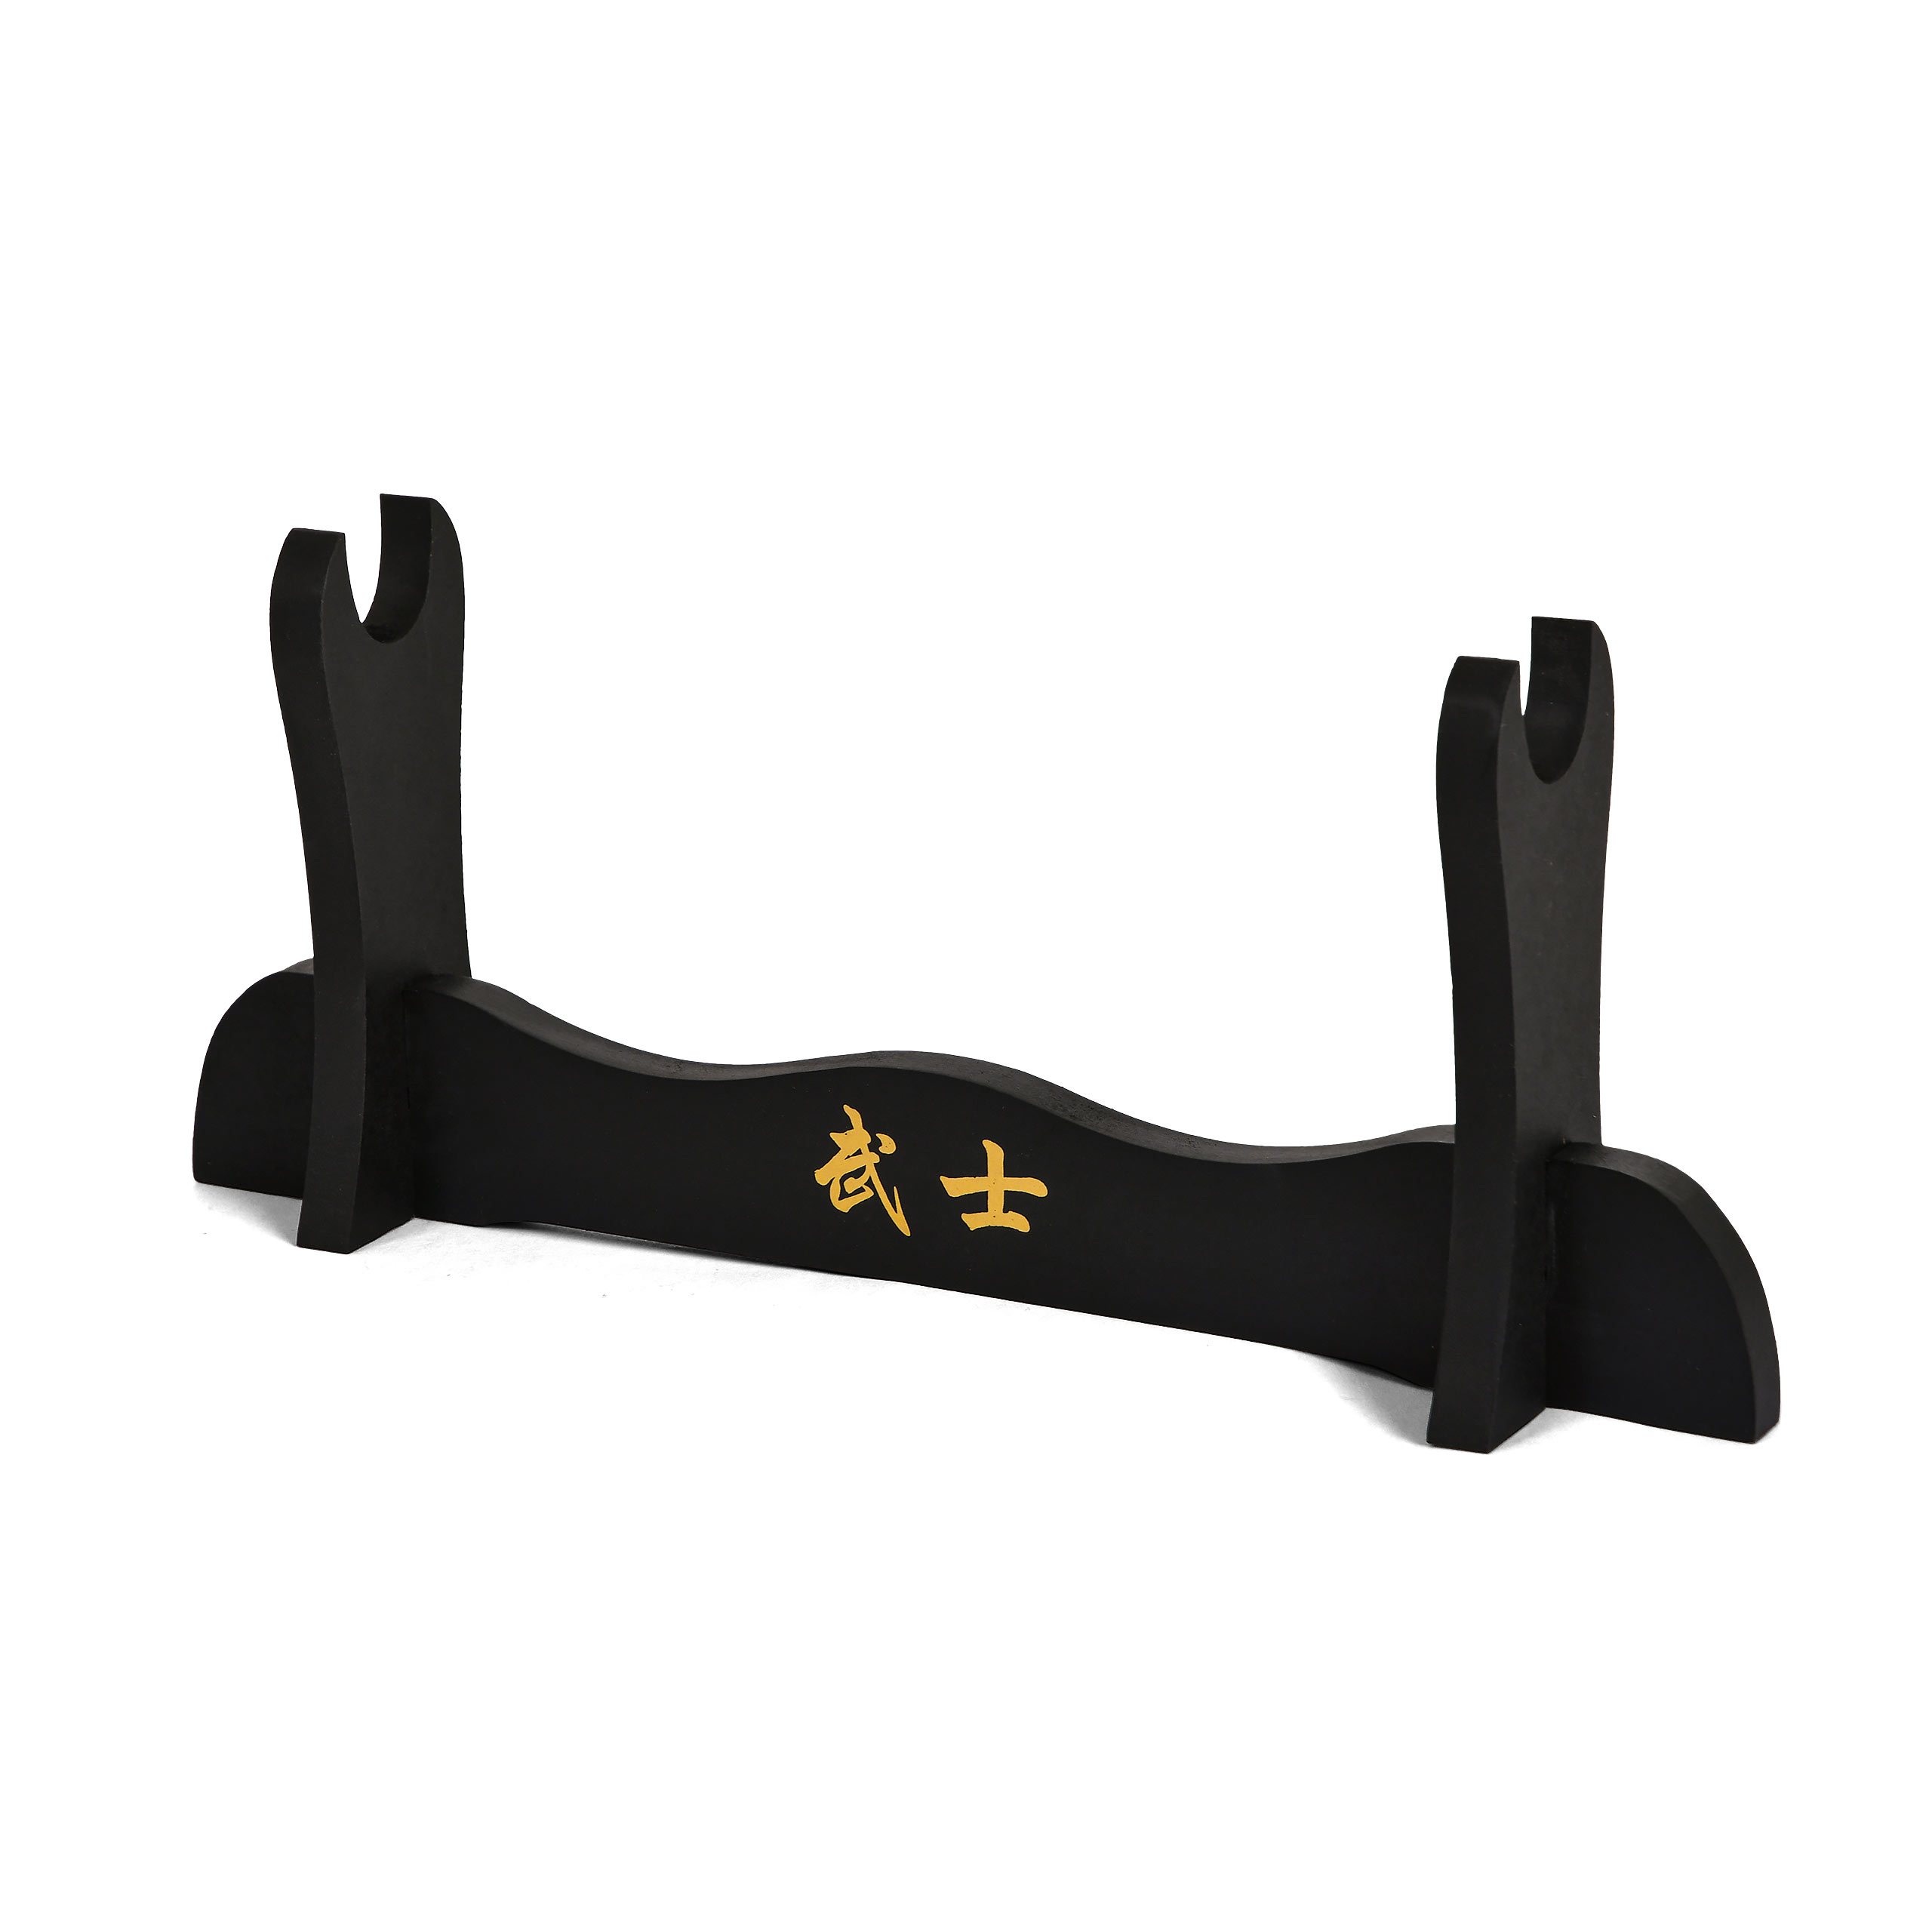 Katana stand for a sword accessories black